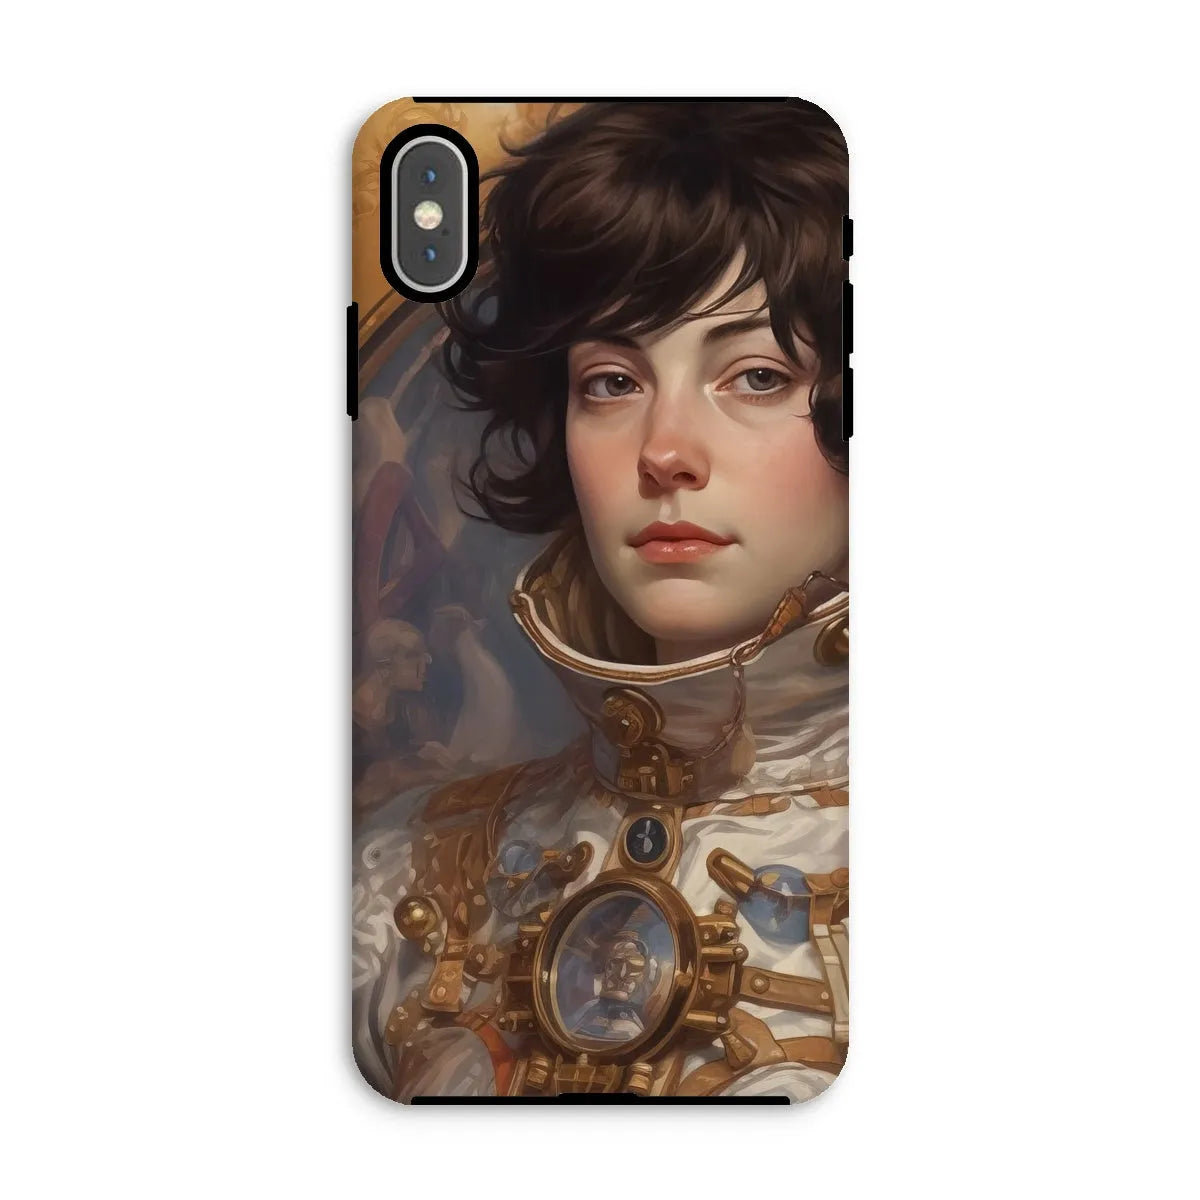 Chloé The Lesbian Astronaut - Space Aesthetic Art Phone Case - Iphone Xs Max / Matte - Mobile Phone Cases - Aesthetic